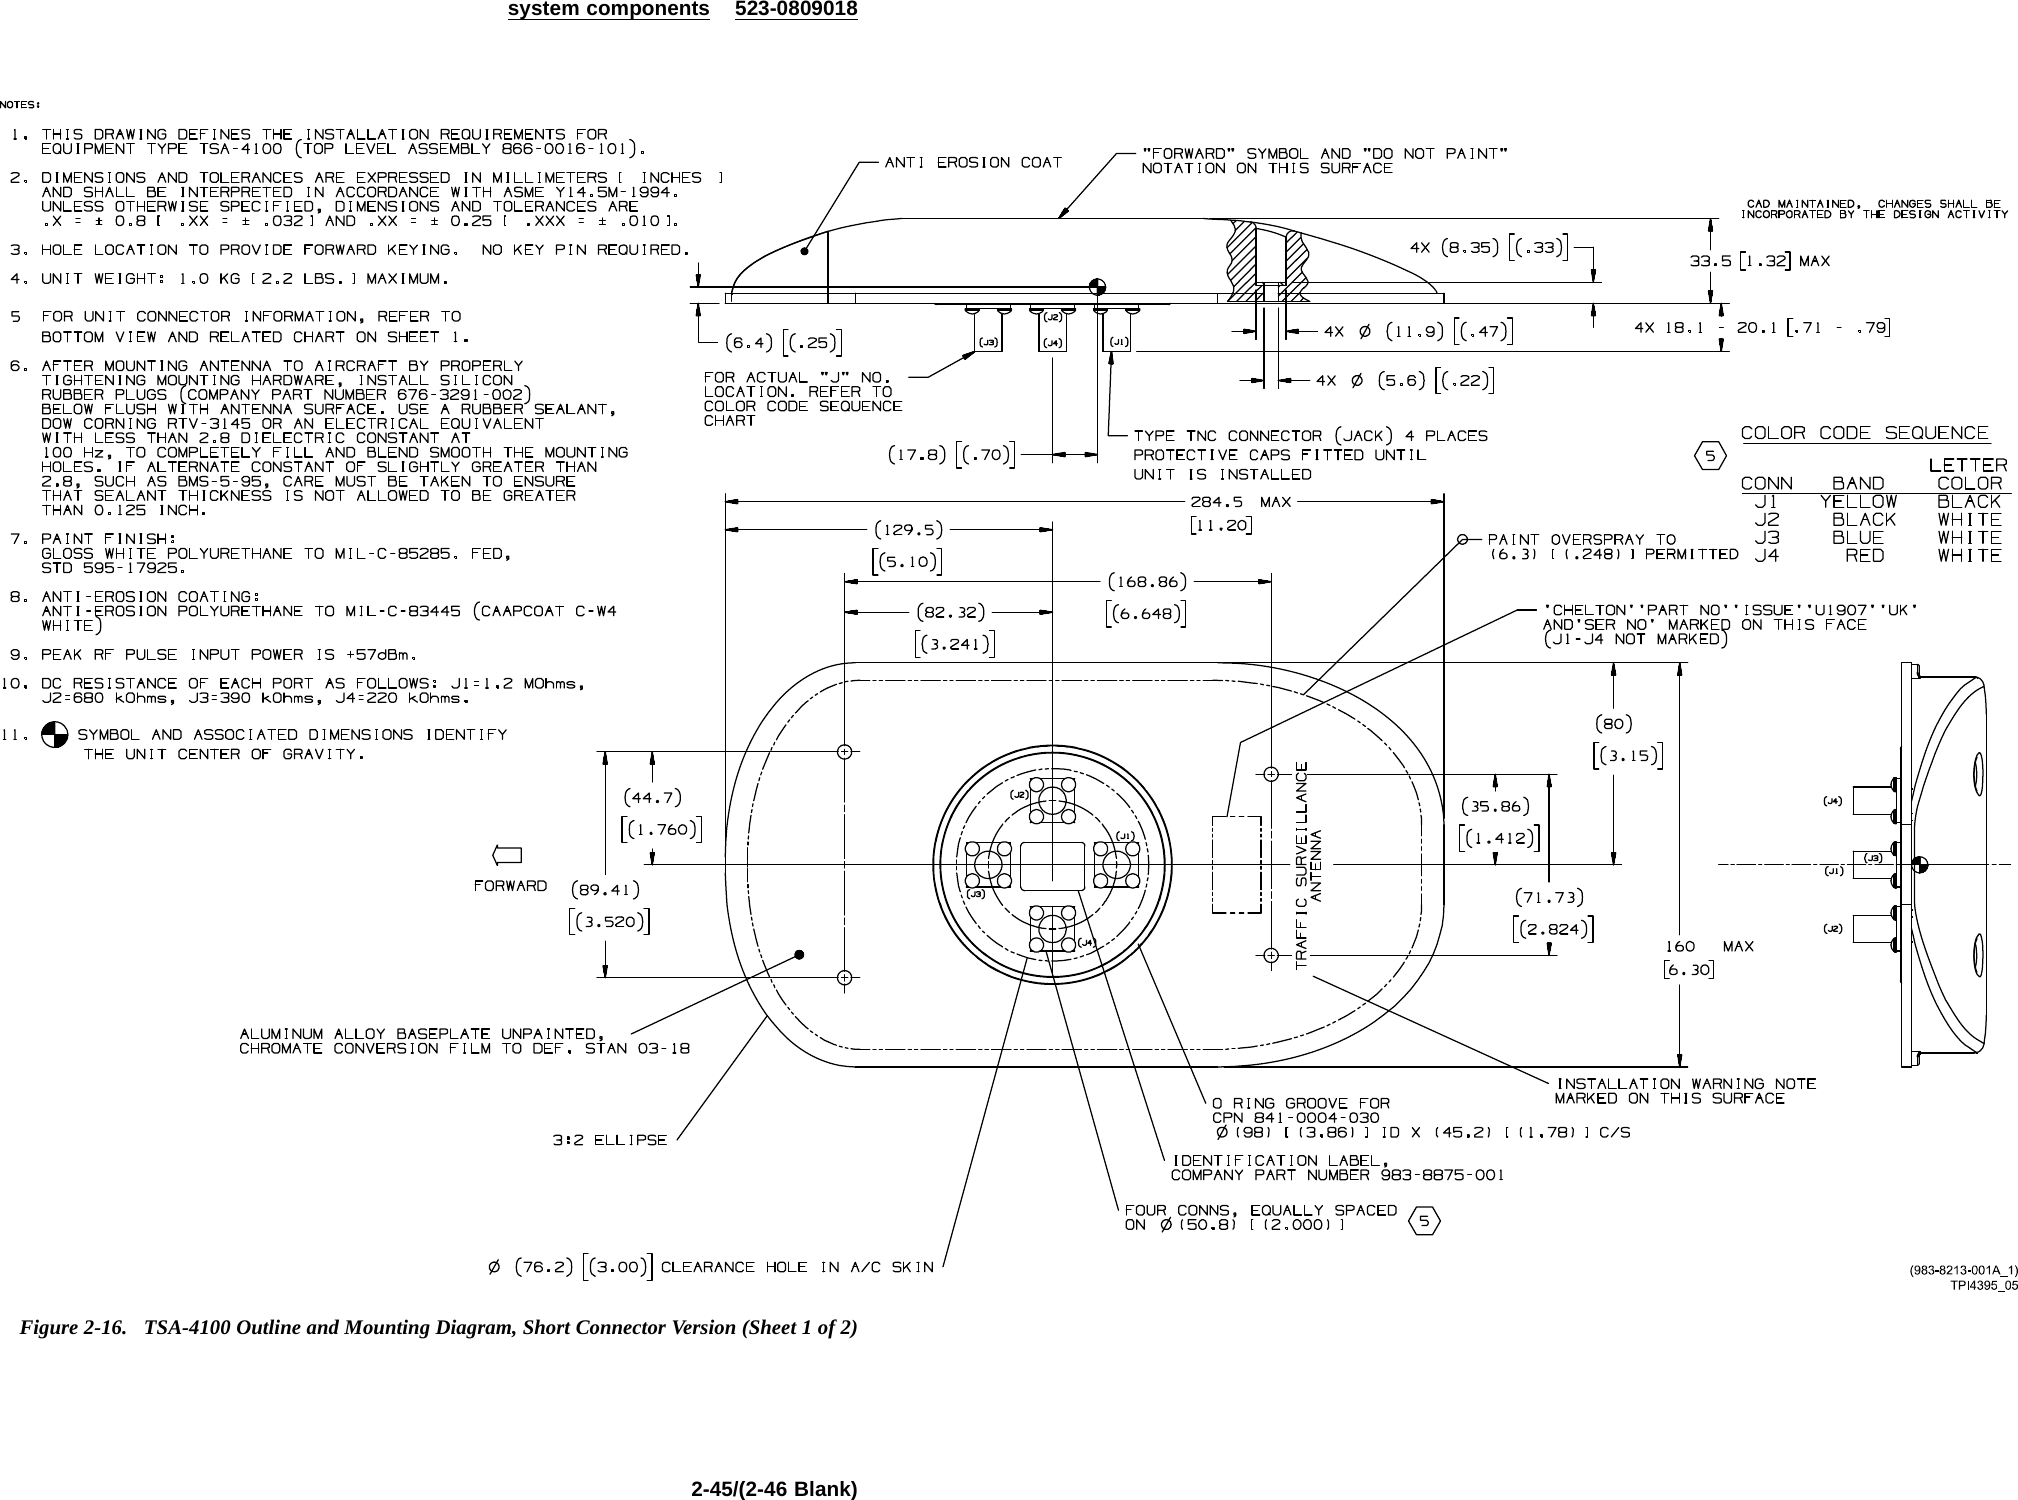 system components 523-0809018Figure 2-16. TSA-4100 Outline and Mounting Diagram, Short Connector Version (Sheet 1 of 2)2-45/(2-46 Blank)